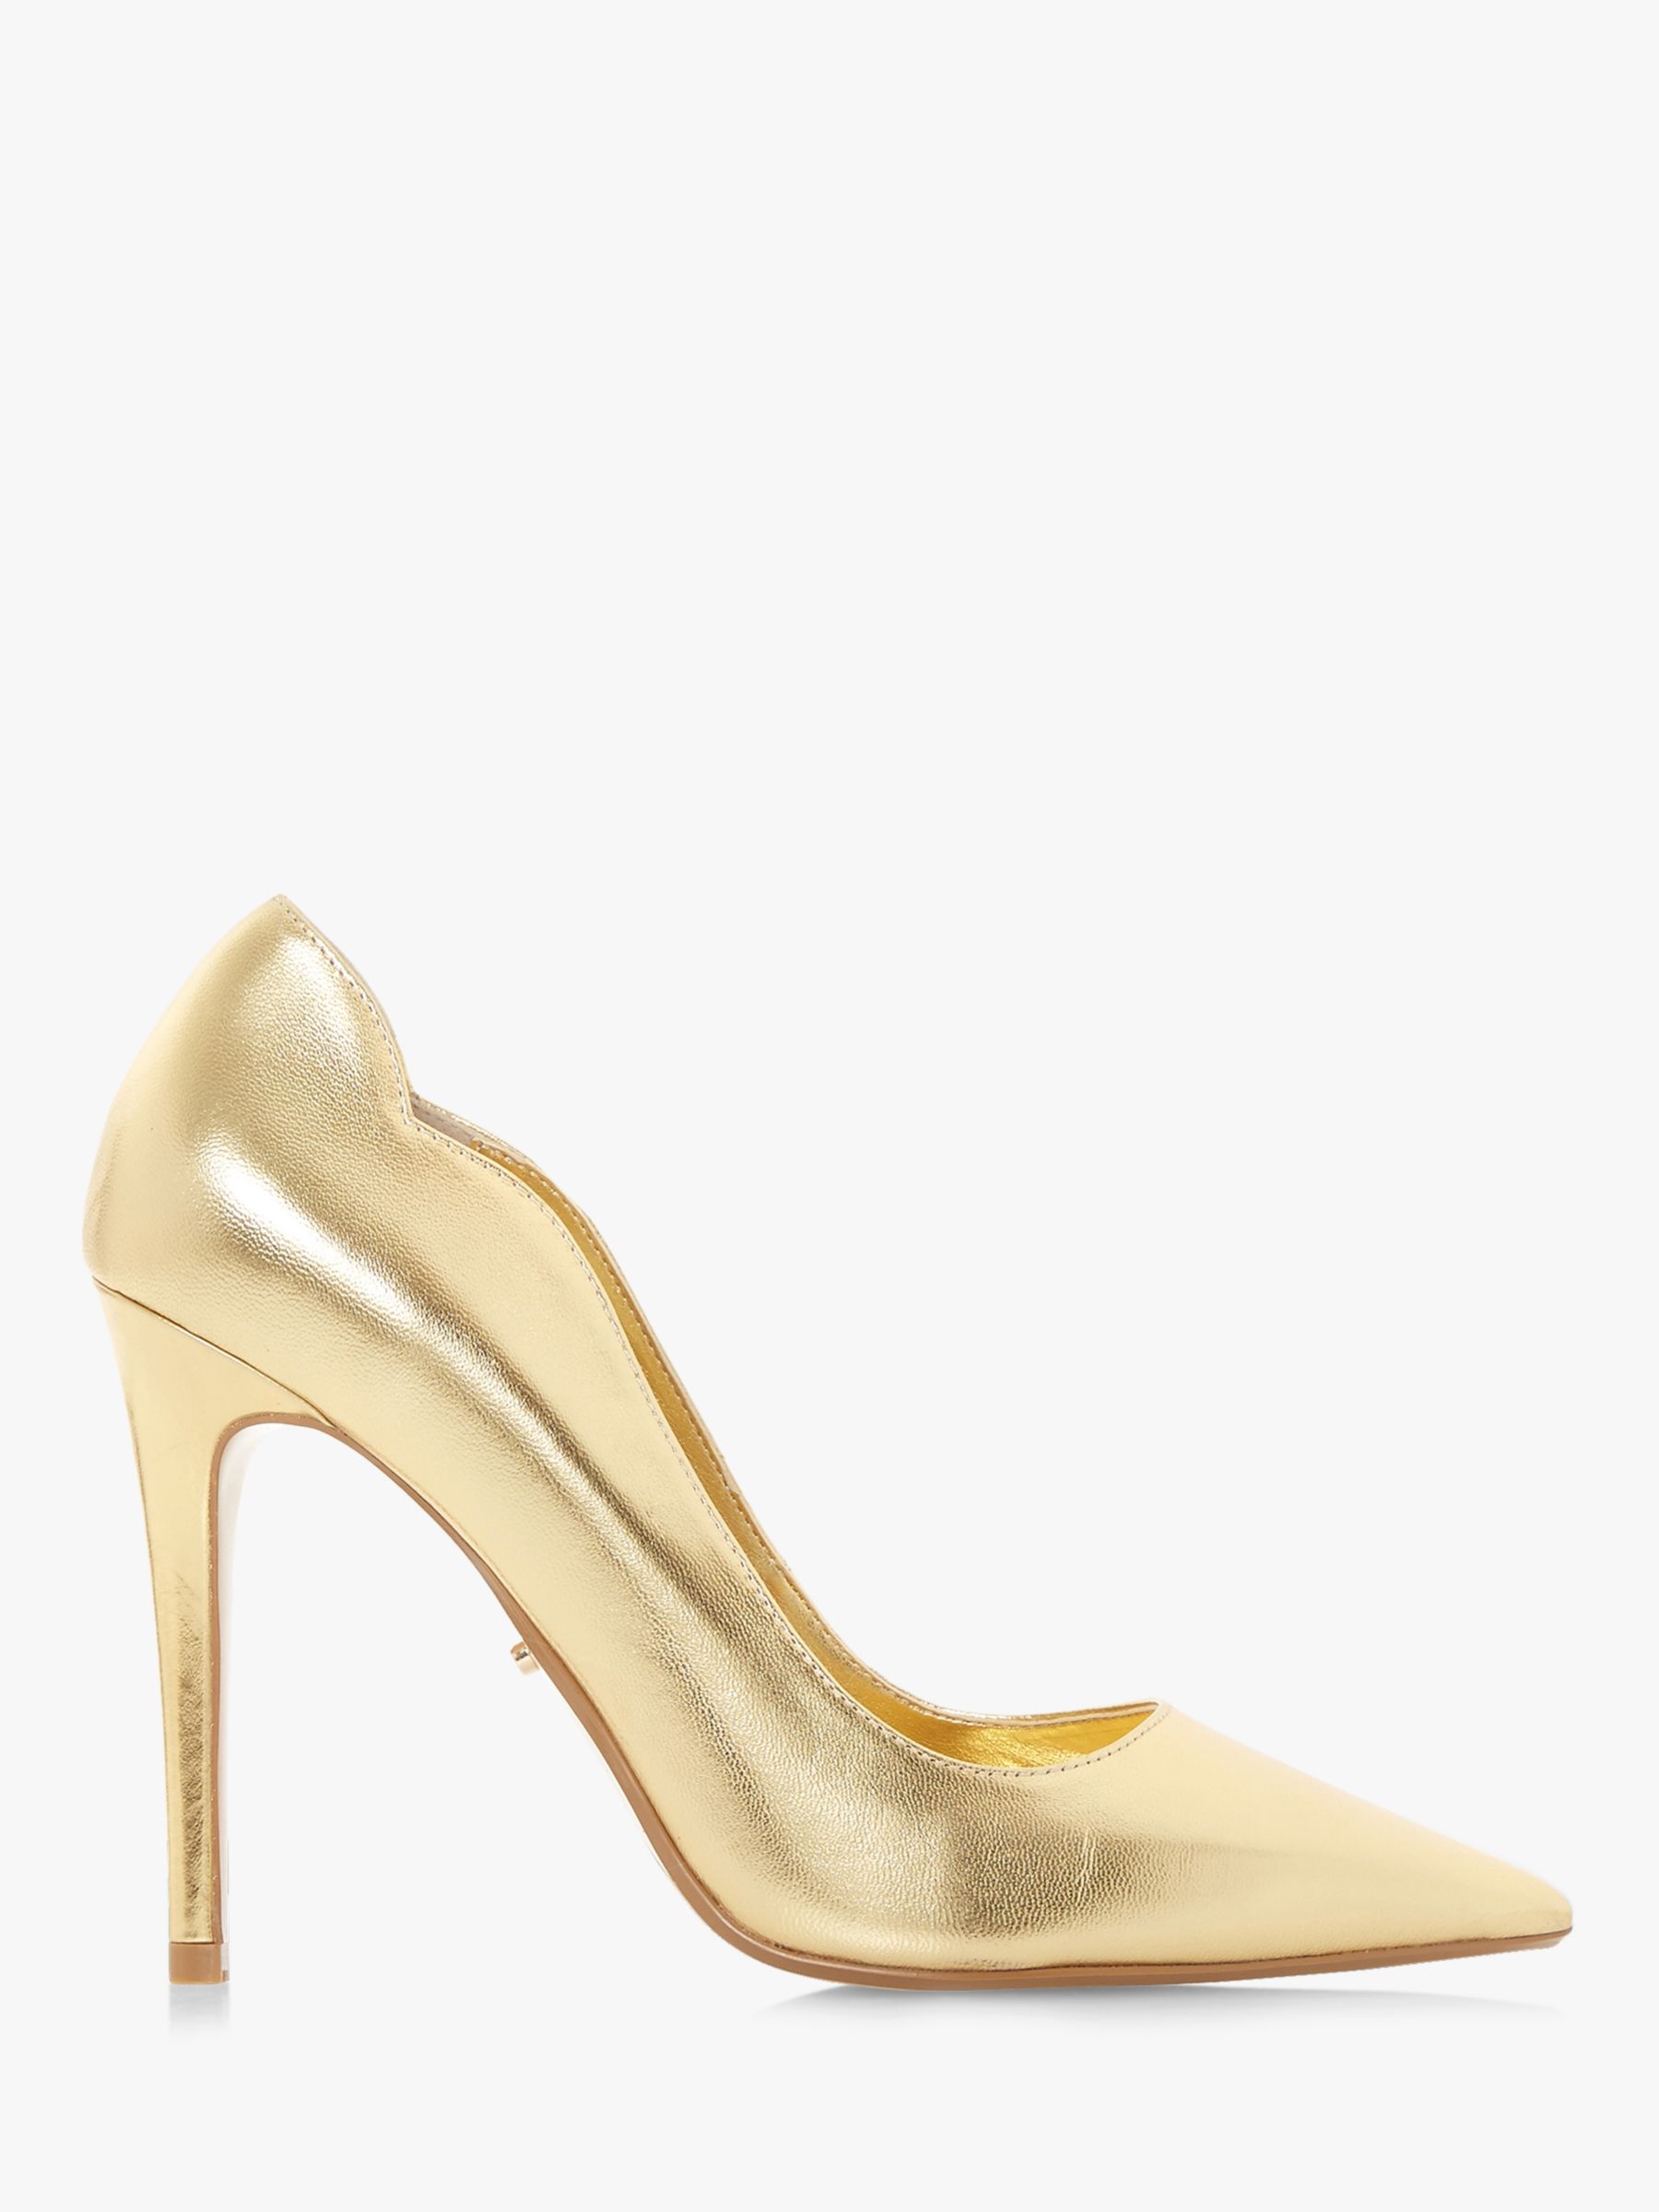 Dune Ashe Cutout Side Heeled Court Shoes, Gold Leather